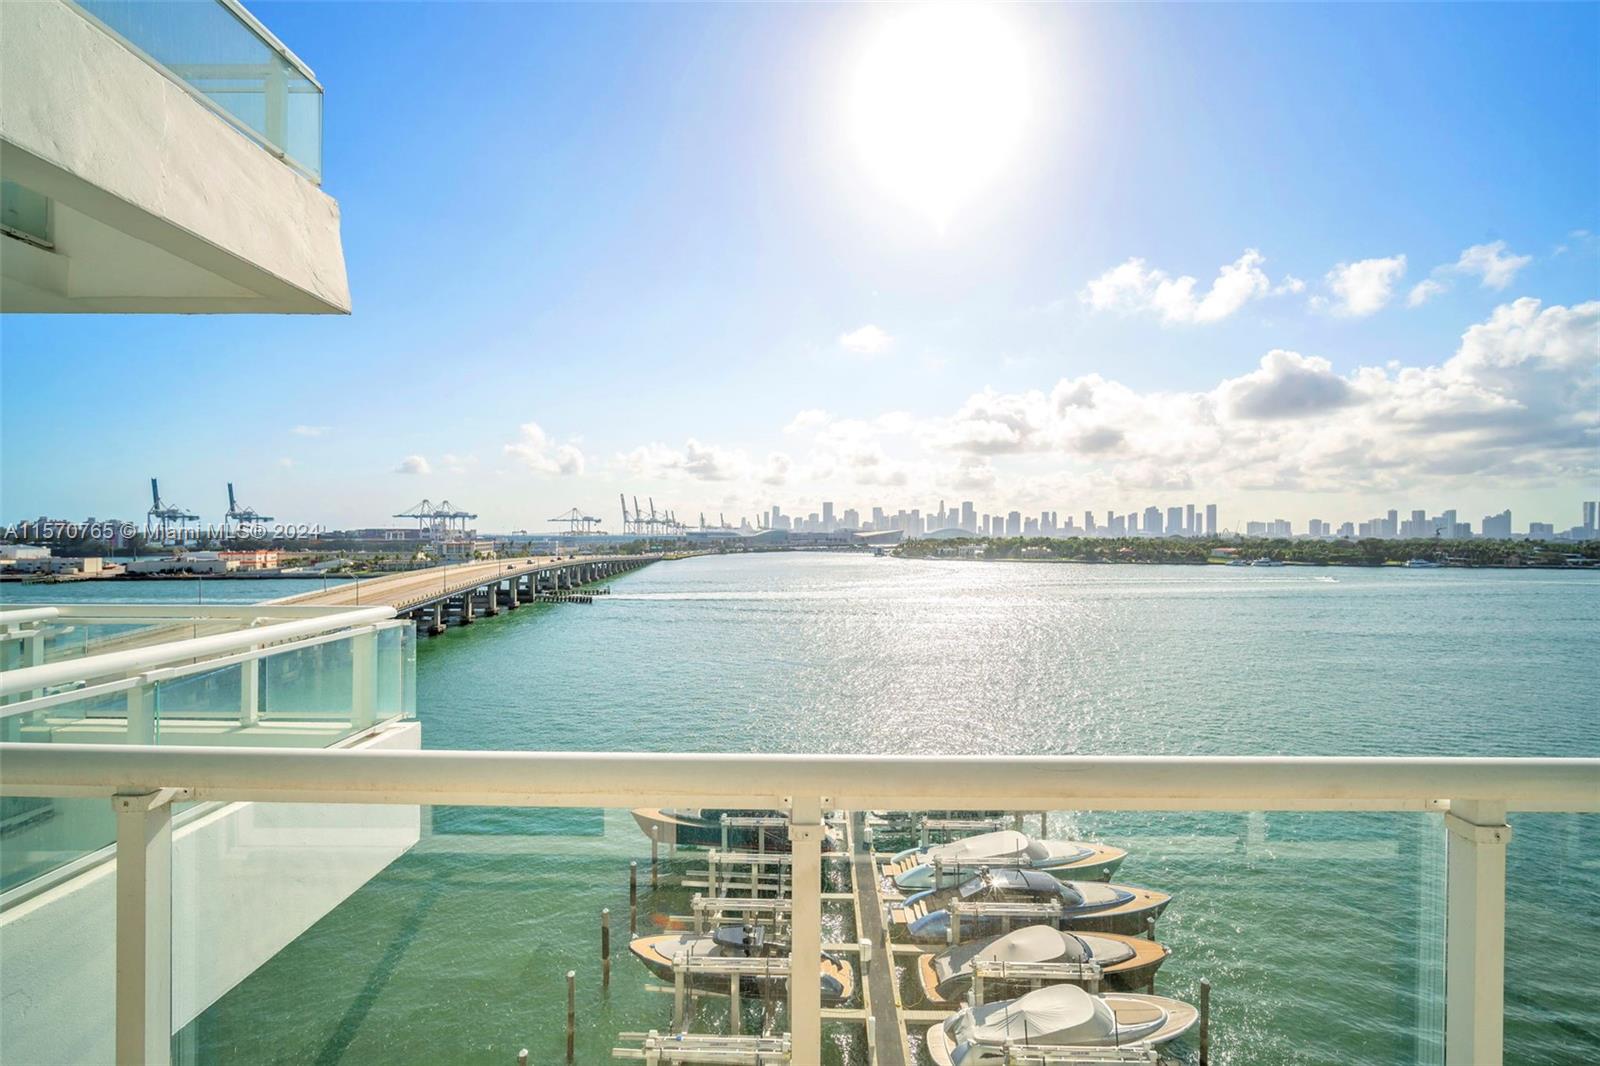 Stunning fully furnished and equipped 1 Bedroom apartment with the Best Sunset and Miami Skyline views. The apartment has marble-floors throughout, walk-in closets, electric shades and brand new furniture. Enjoy the 5-Star amenities and service of the luxurious Bentley Bay including an infinity-edge pool and 2 large whirlpool Jacuzzi’s, a fantastic gym overlooking the Biscayne bay with a spa, massage room, sauna and steam room. 24/7 Valet-service, Wifi and basic cable are included in the monthly rent. Available now!